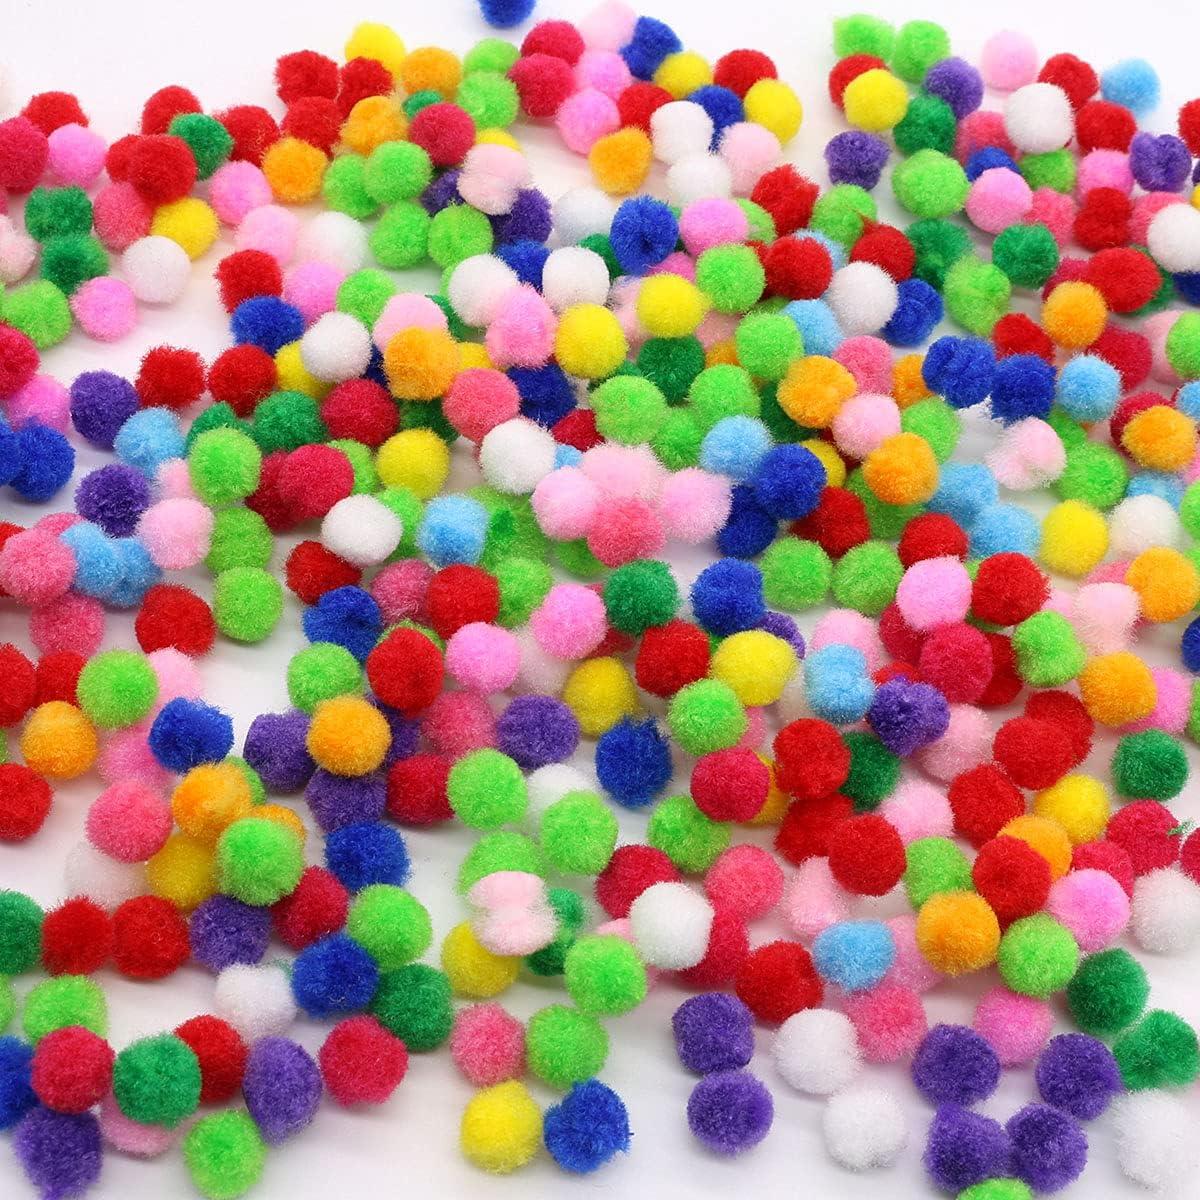 YooThink 1500 Pieces Pompoms for Crafts,Small Size 1CM Small pom poms for  Crafts,Pompoms for DIY Creative Crafts Decorations